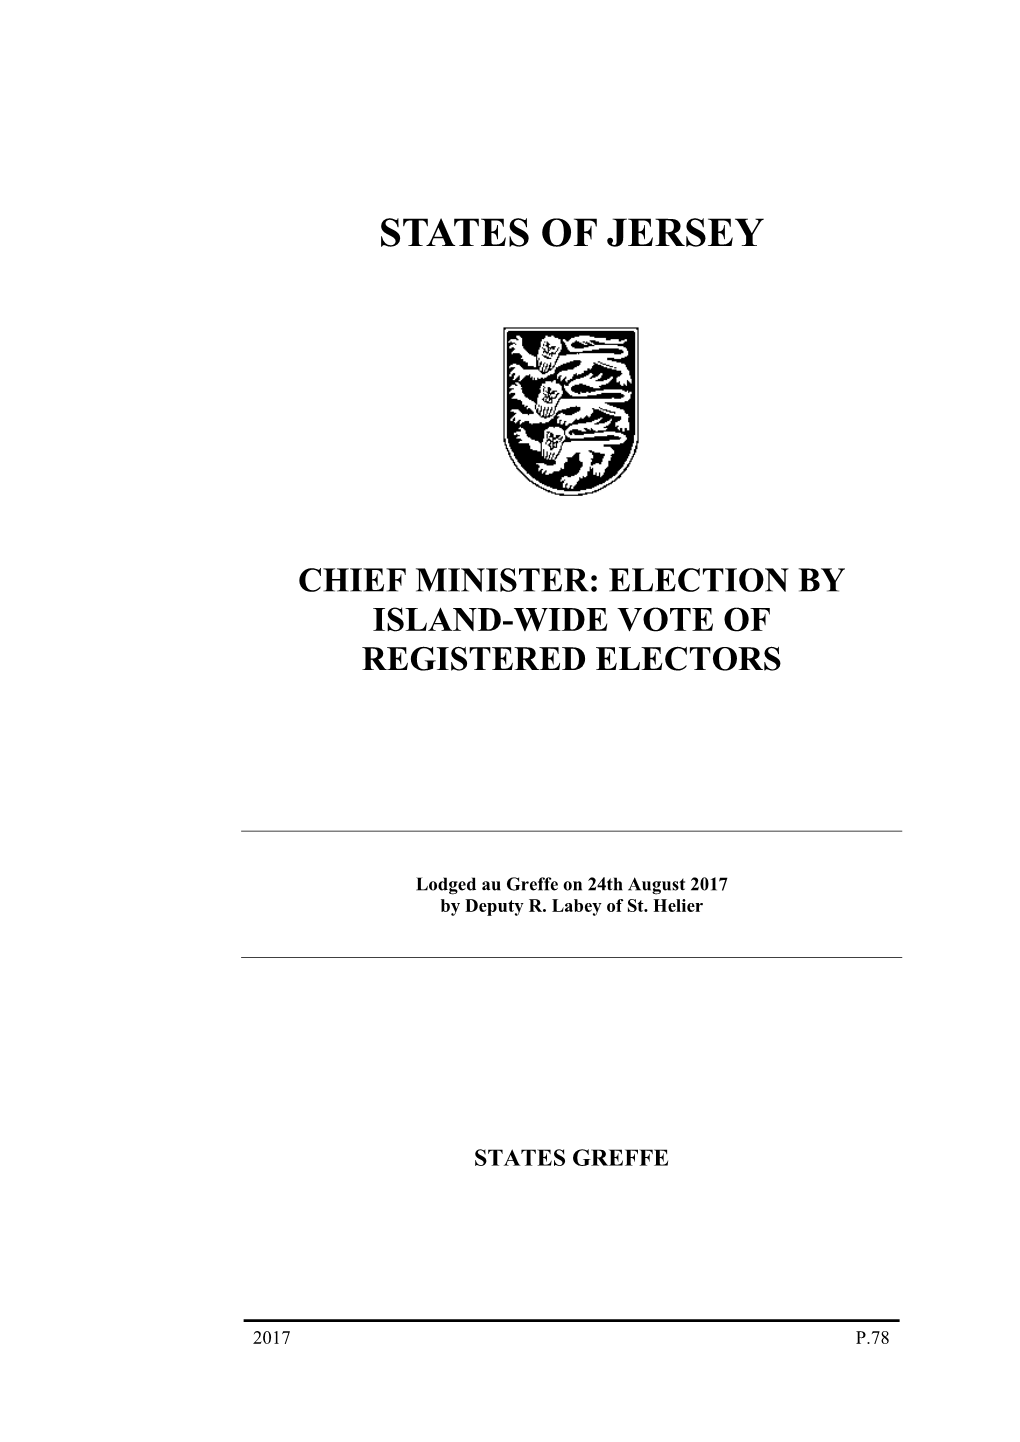 Chief Minister: Election by Island-Wide Vote of Registered Electors